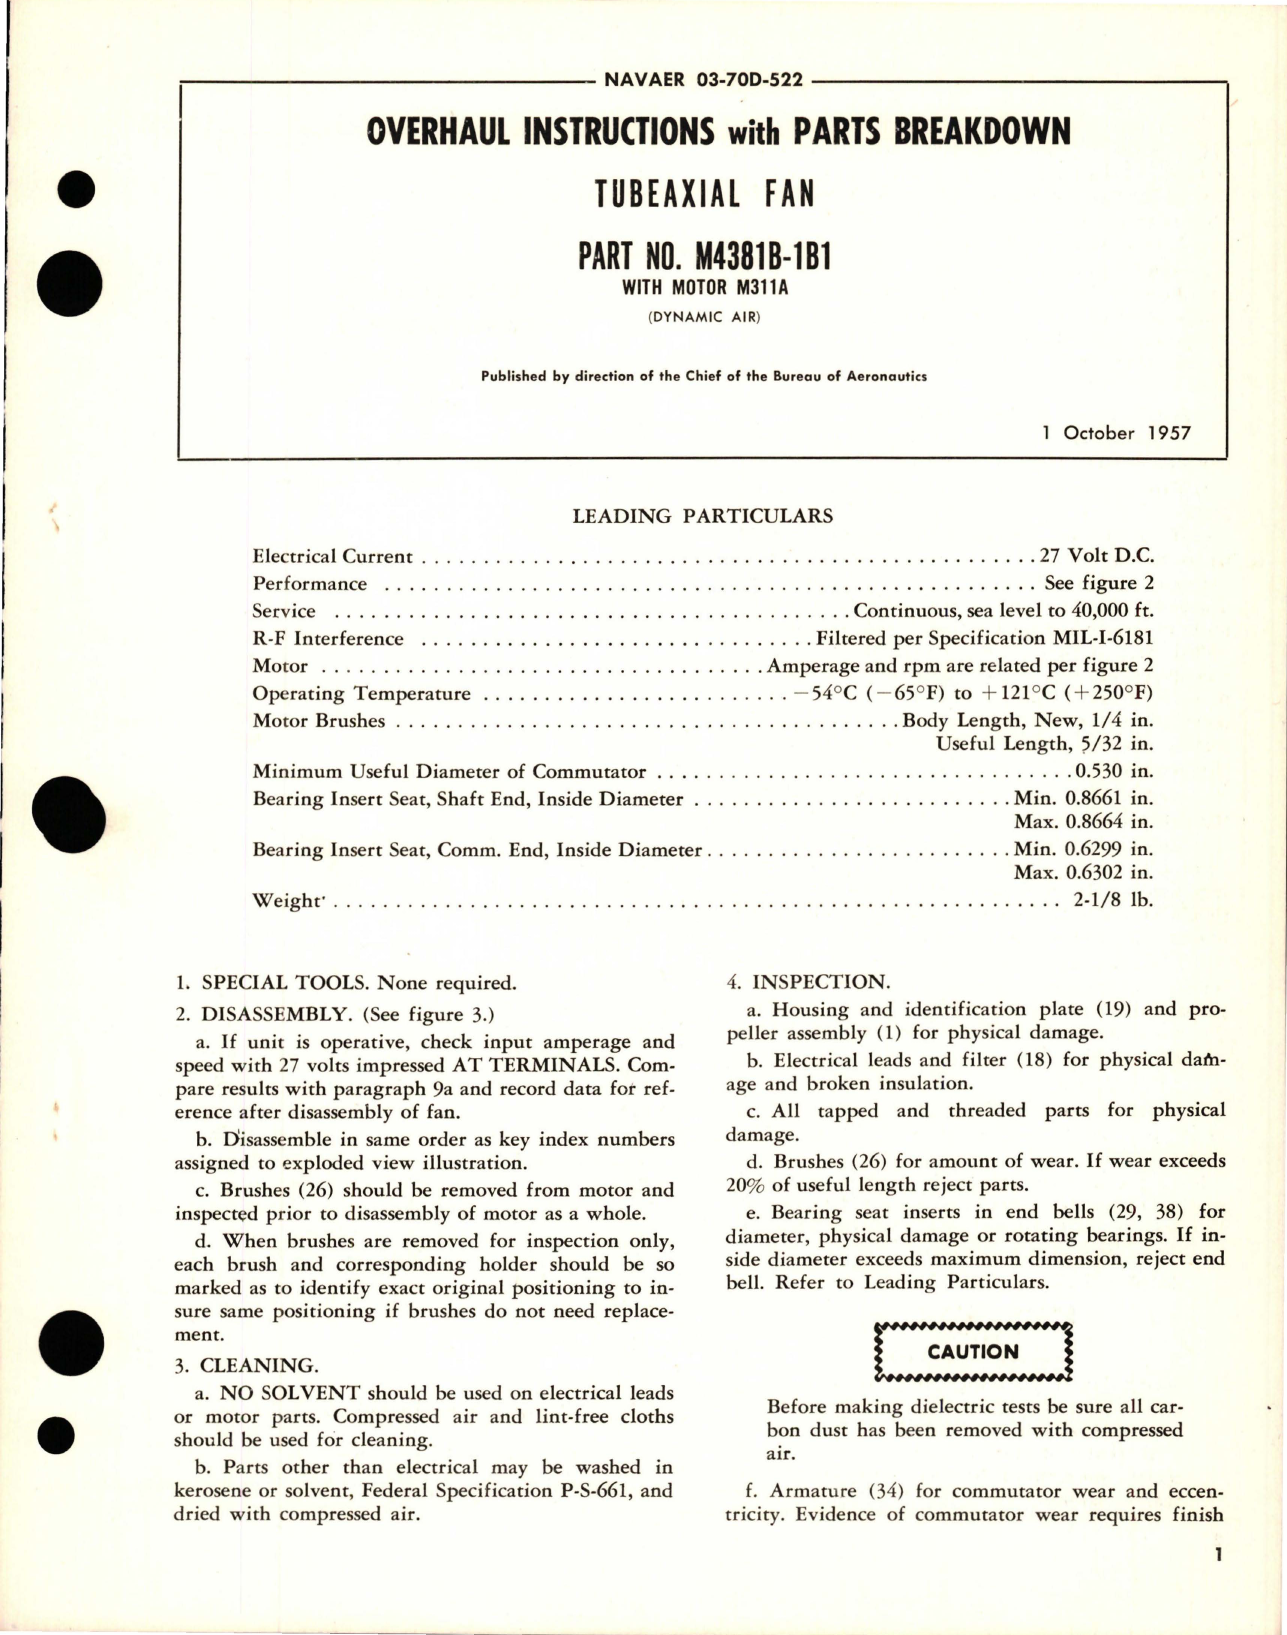 Sample page 1 from AirCorps Library document: Overhaul Instructions with Parts Breakdown for Tubeaxial Fan - Part M4381B-1B1 with Motor M311A 